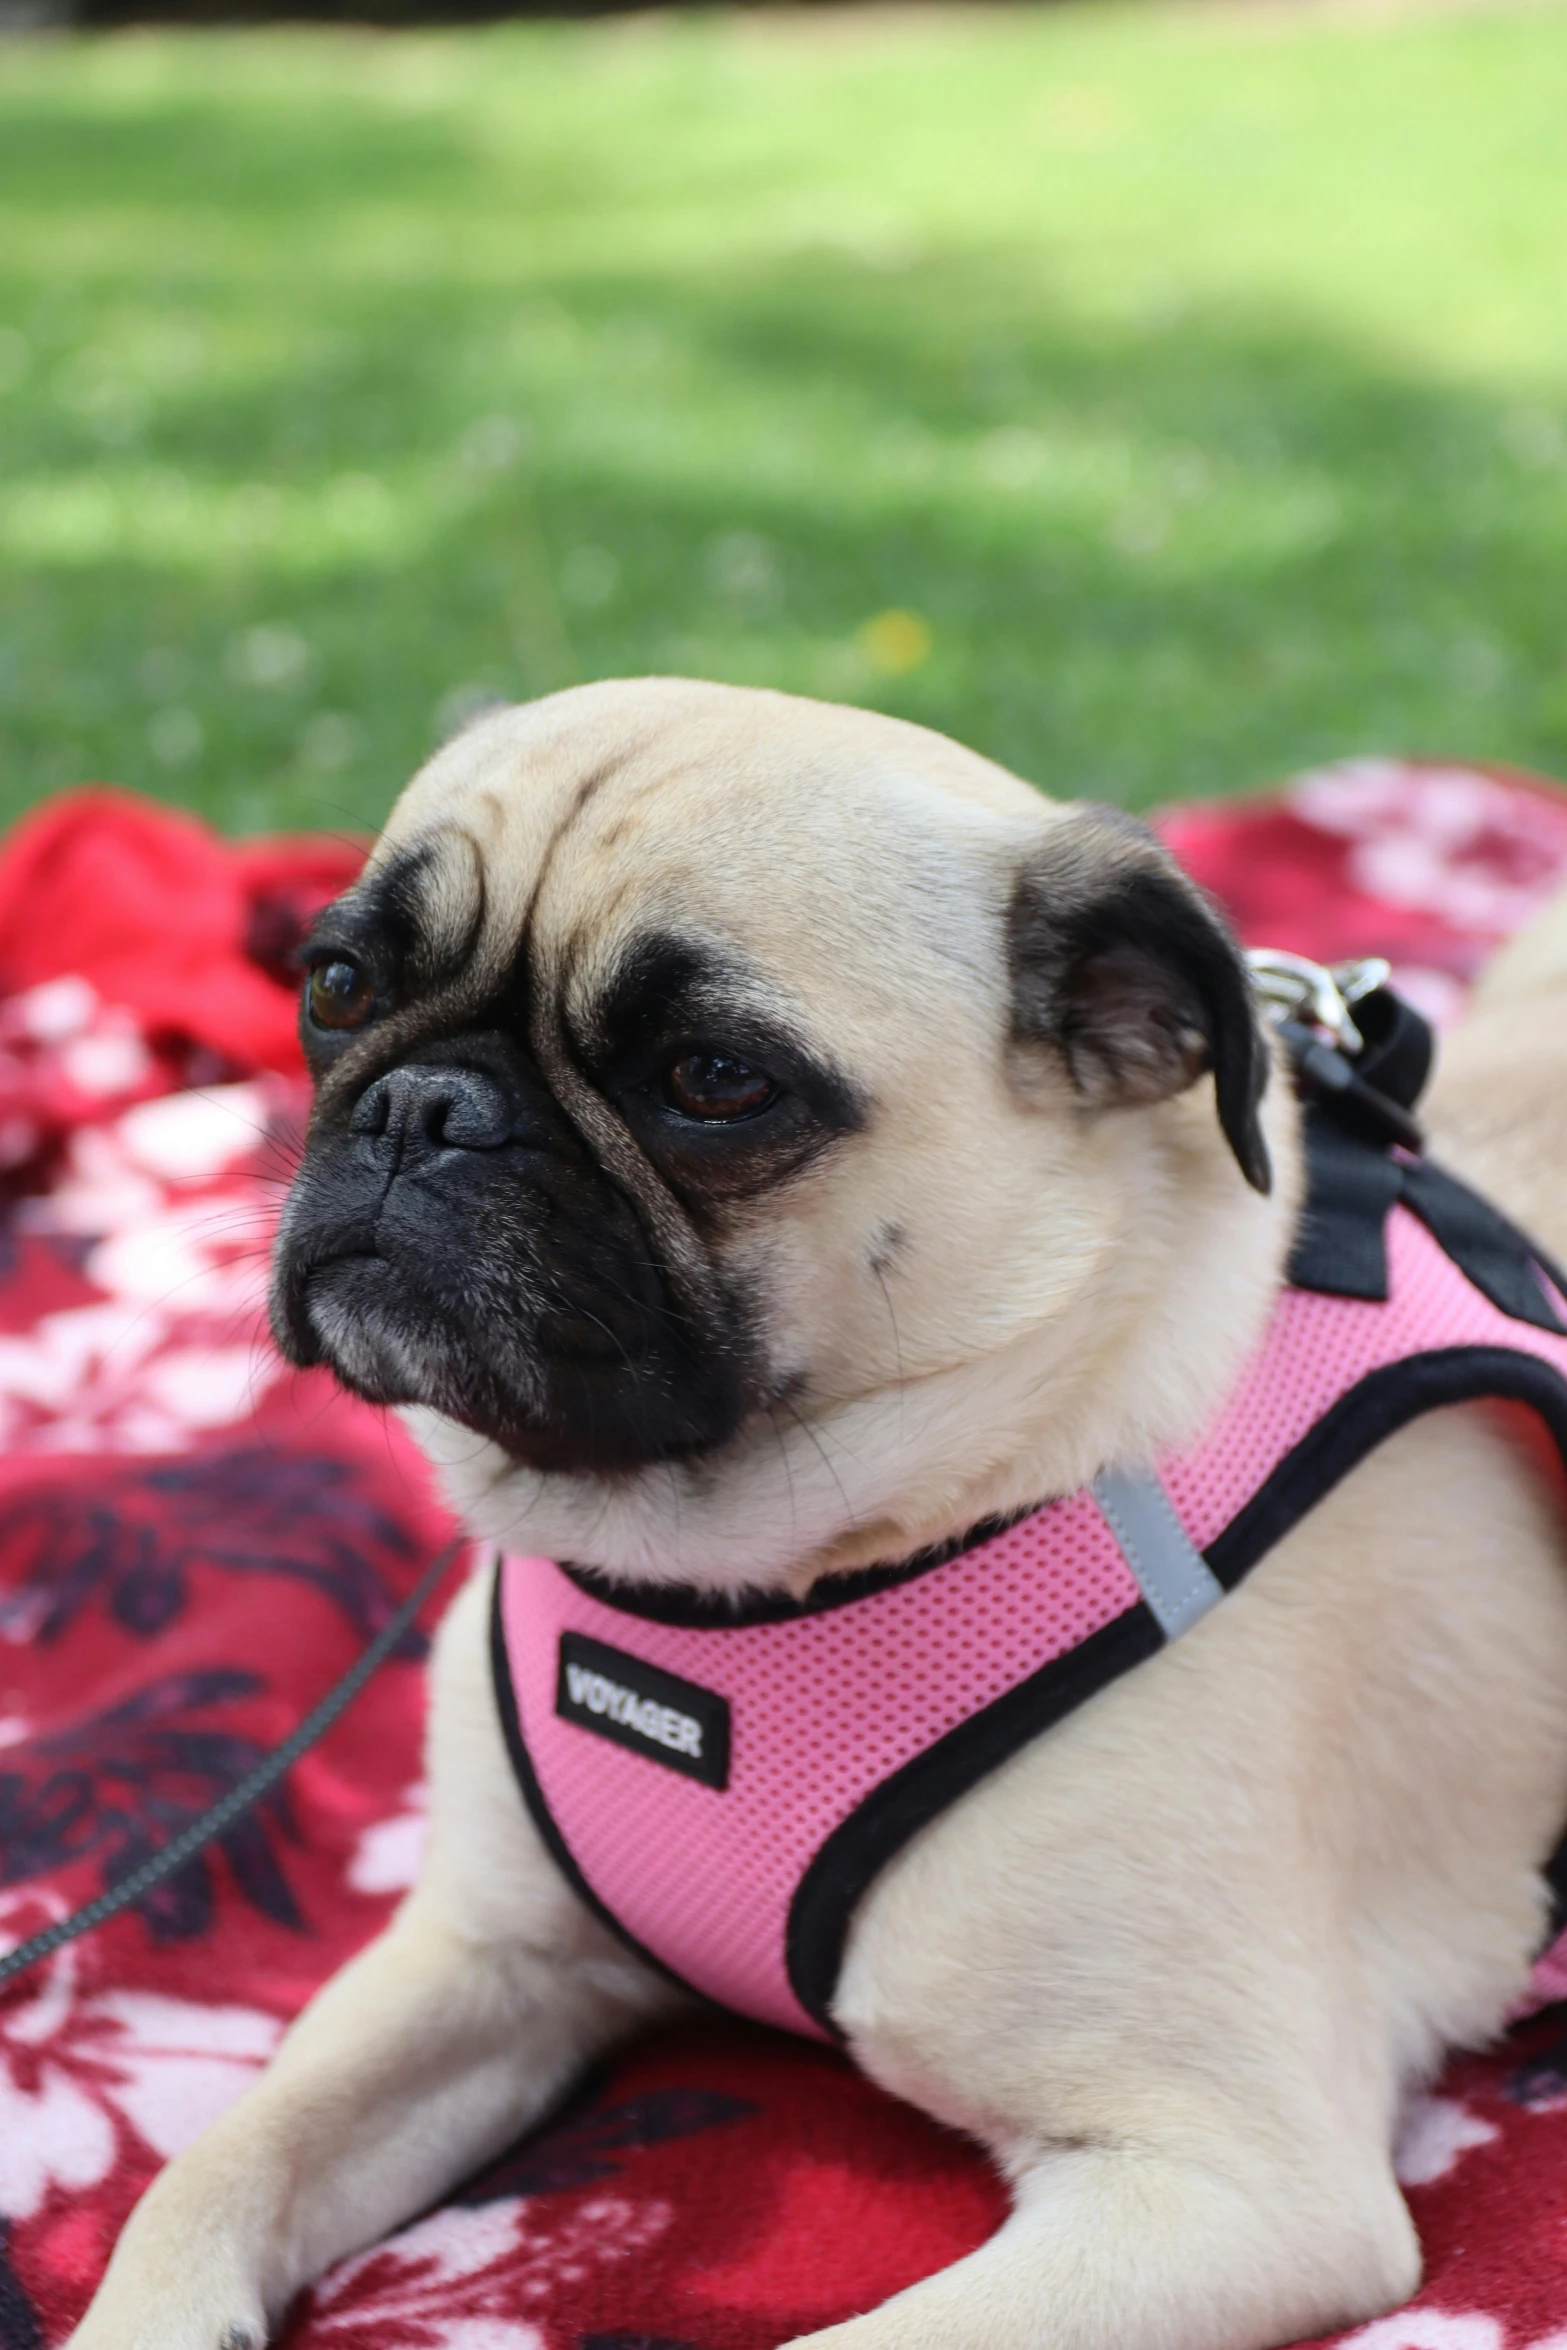 the small pug has a harness over it's collar